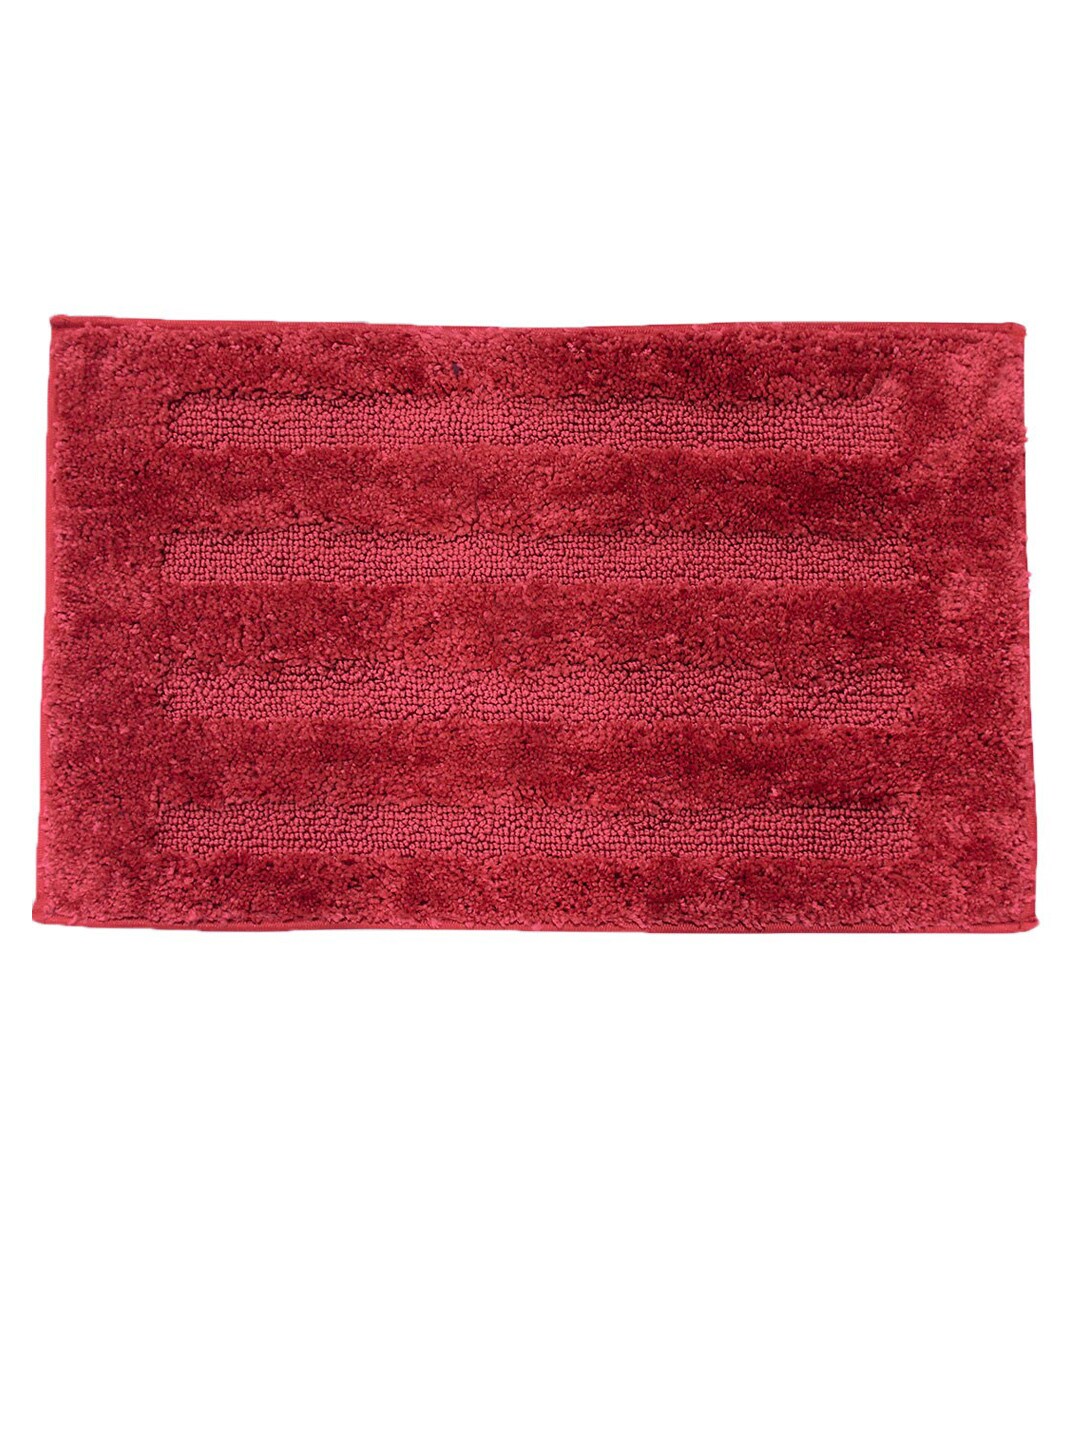 LUXEHOME INTERNATIONAL Maroon 1780 GSM Bath Rug Price in India